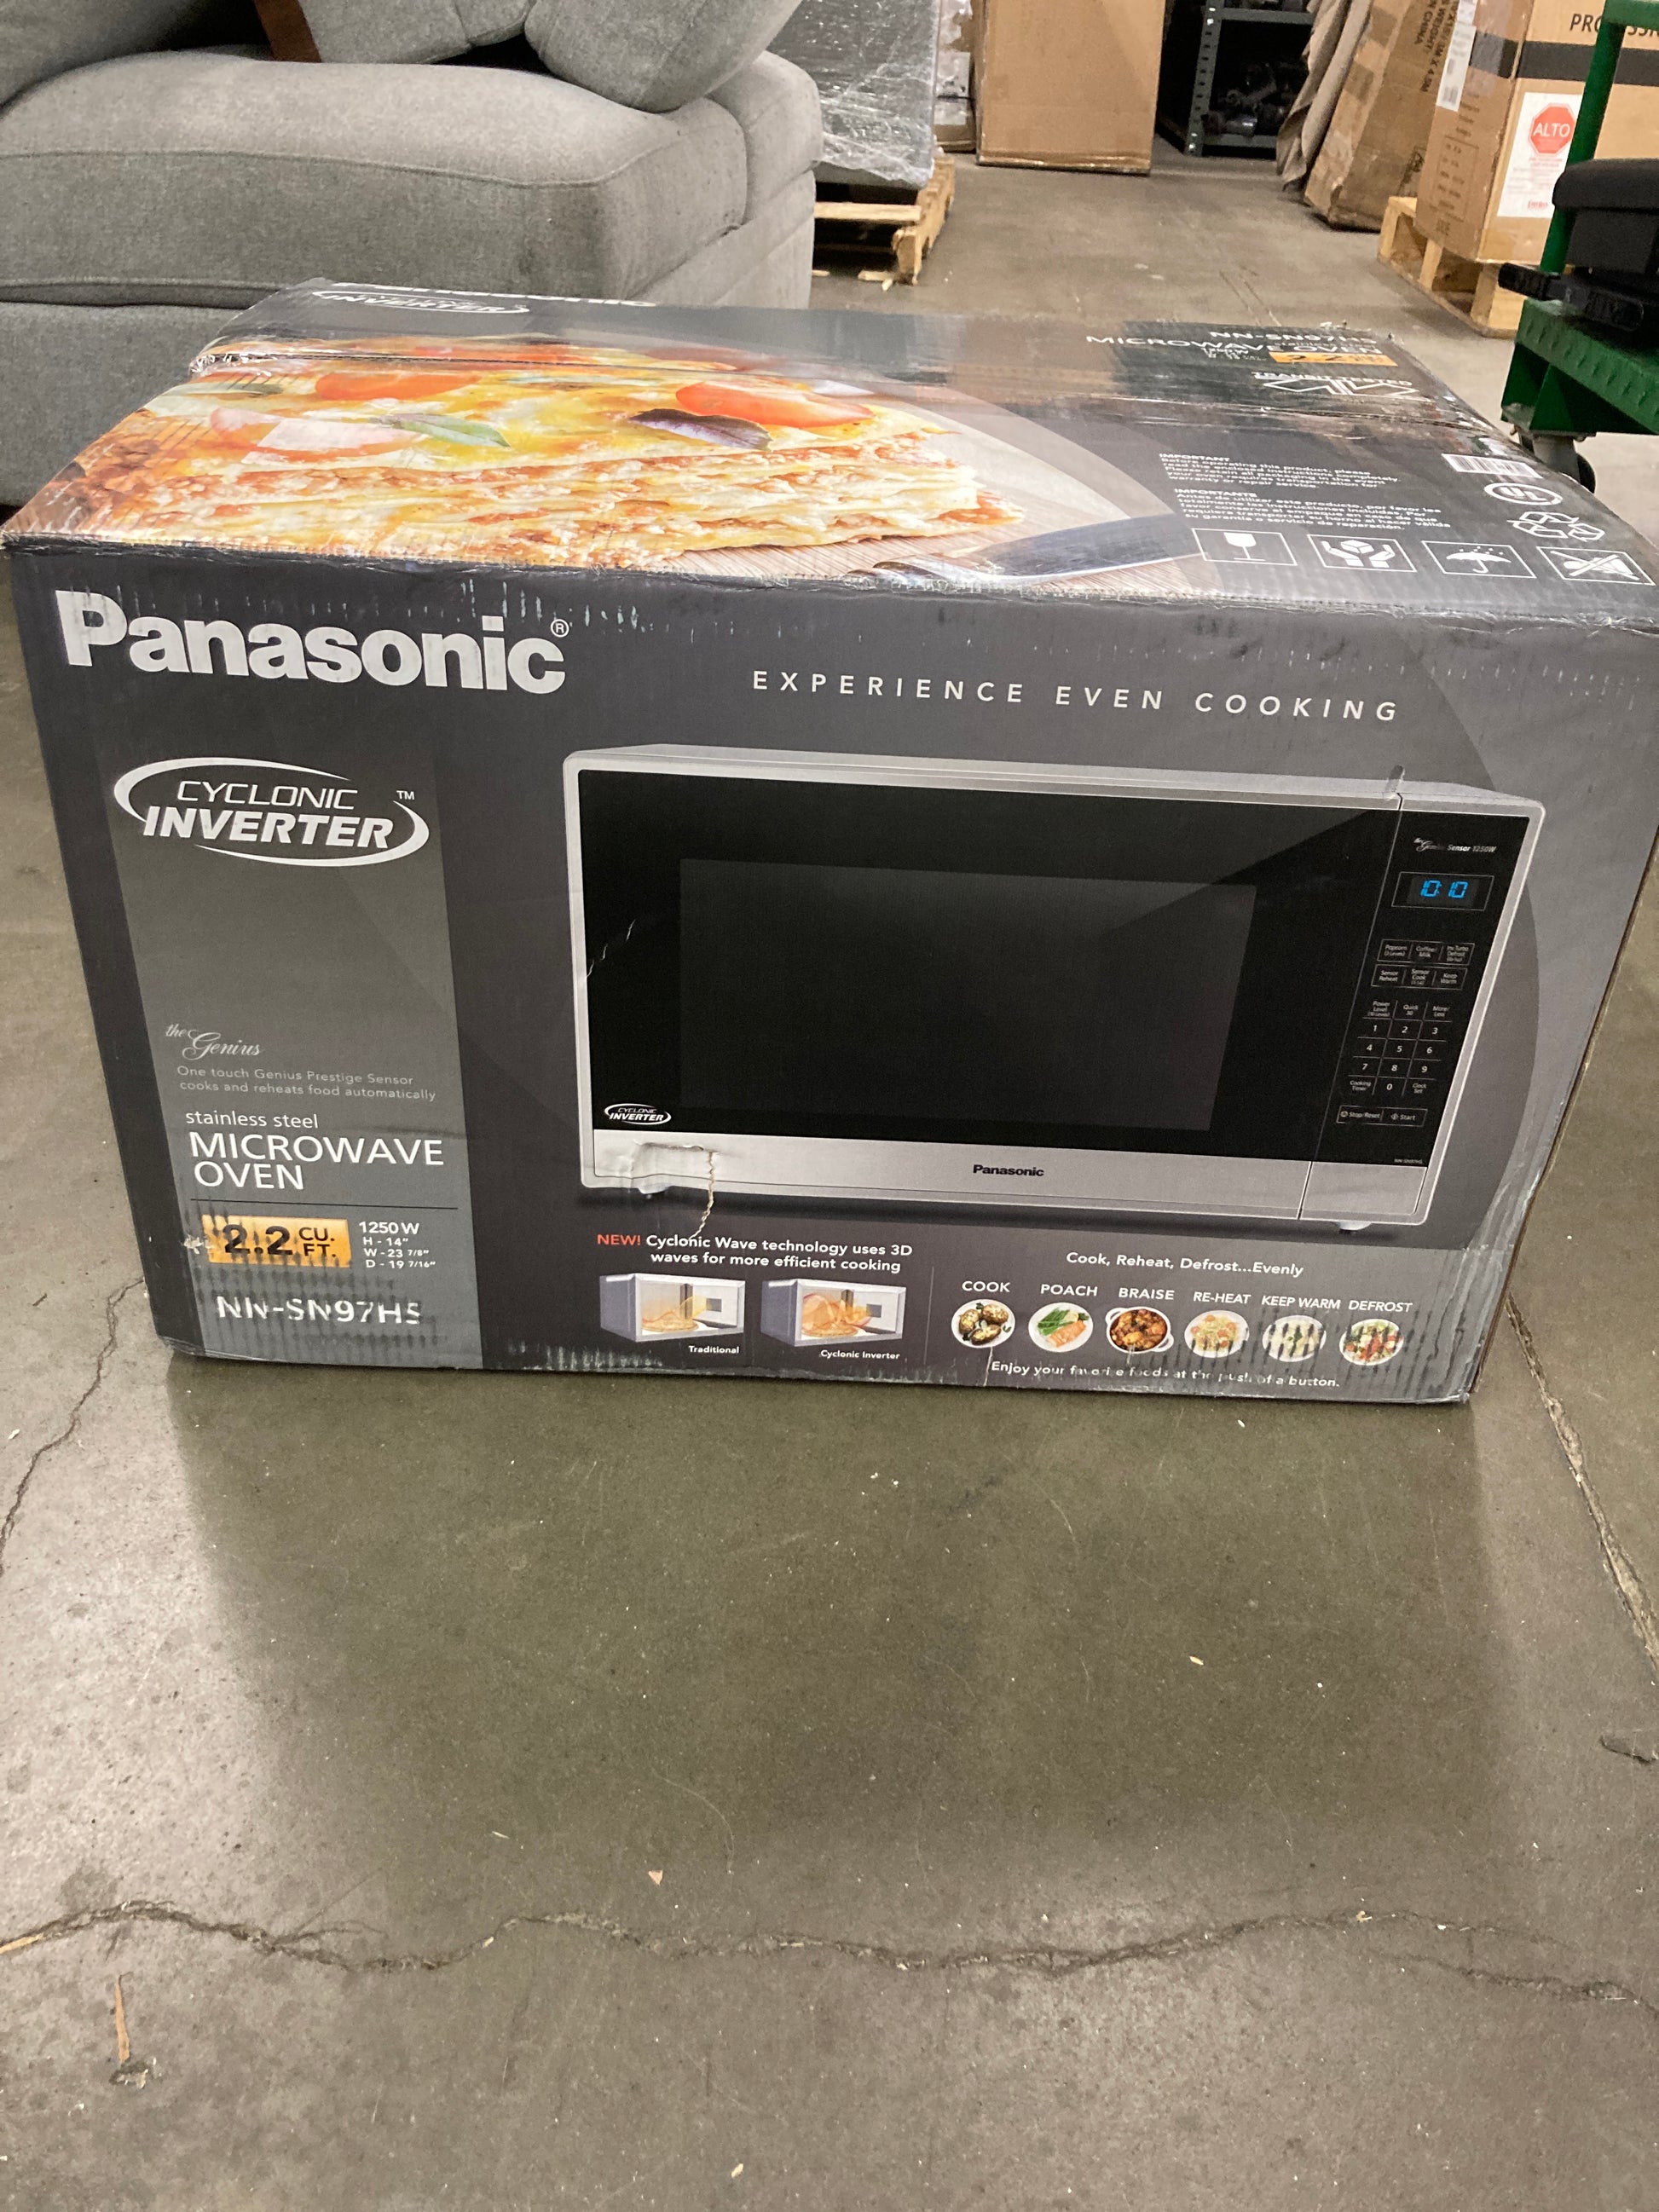 Panasonic Family Size 2.2CuFt Countertop Microwave Oven with Cyclonic Inverter Technology NN-SN97HS Default Title